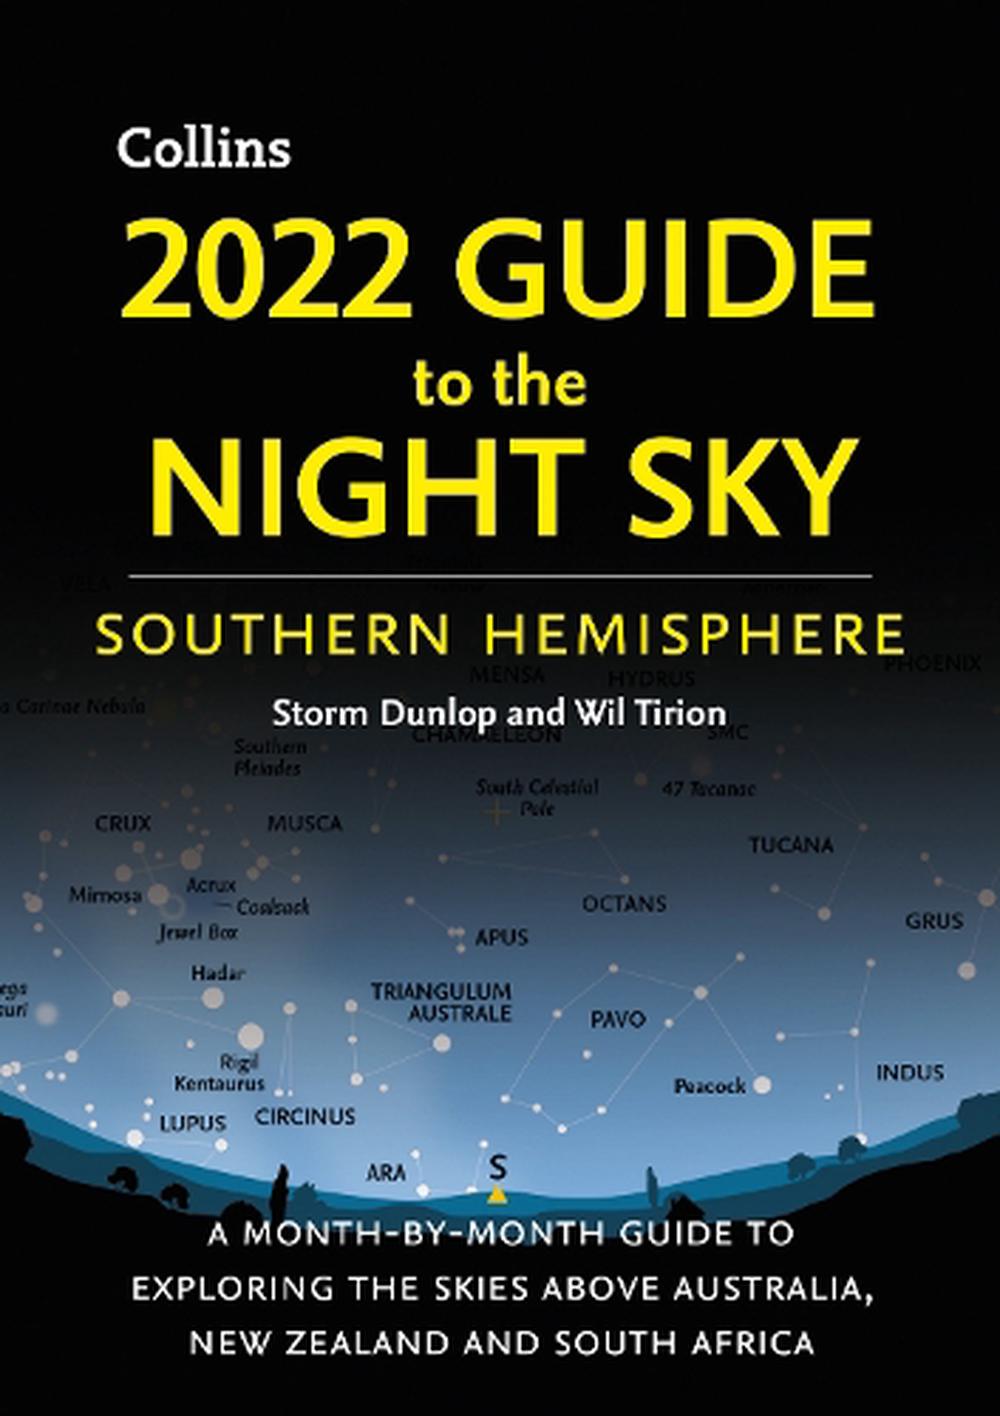 2022 Guide to the Night Sky Southern Hemisphere by Storm Dunlop